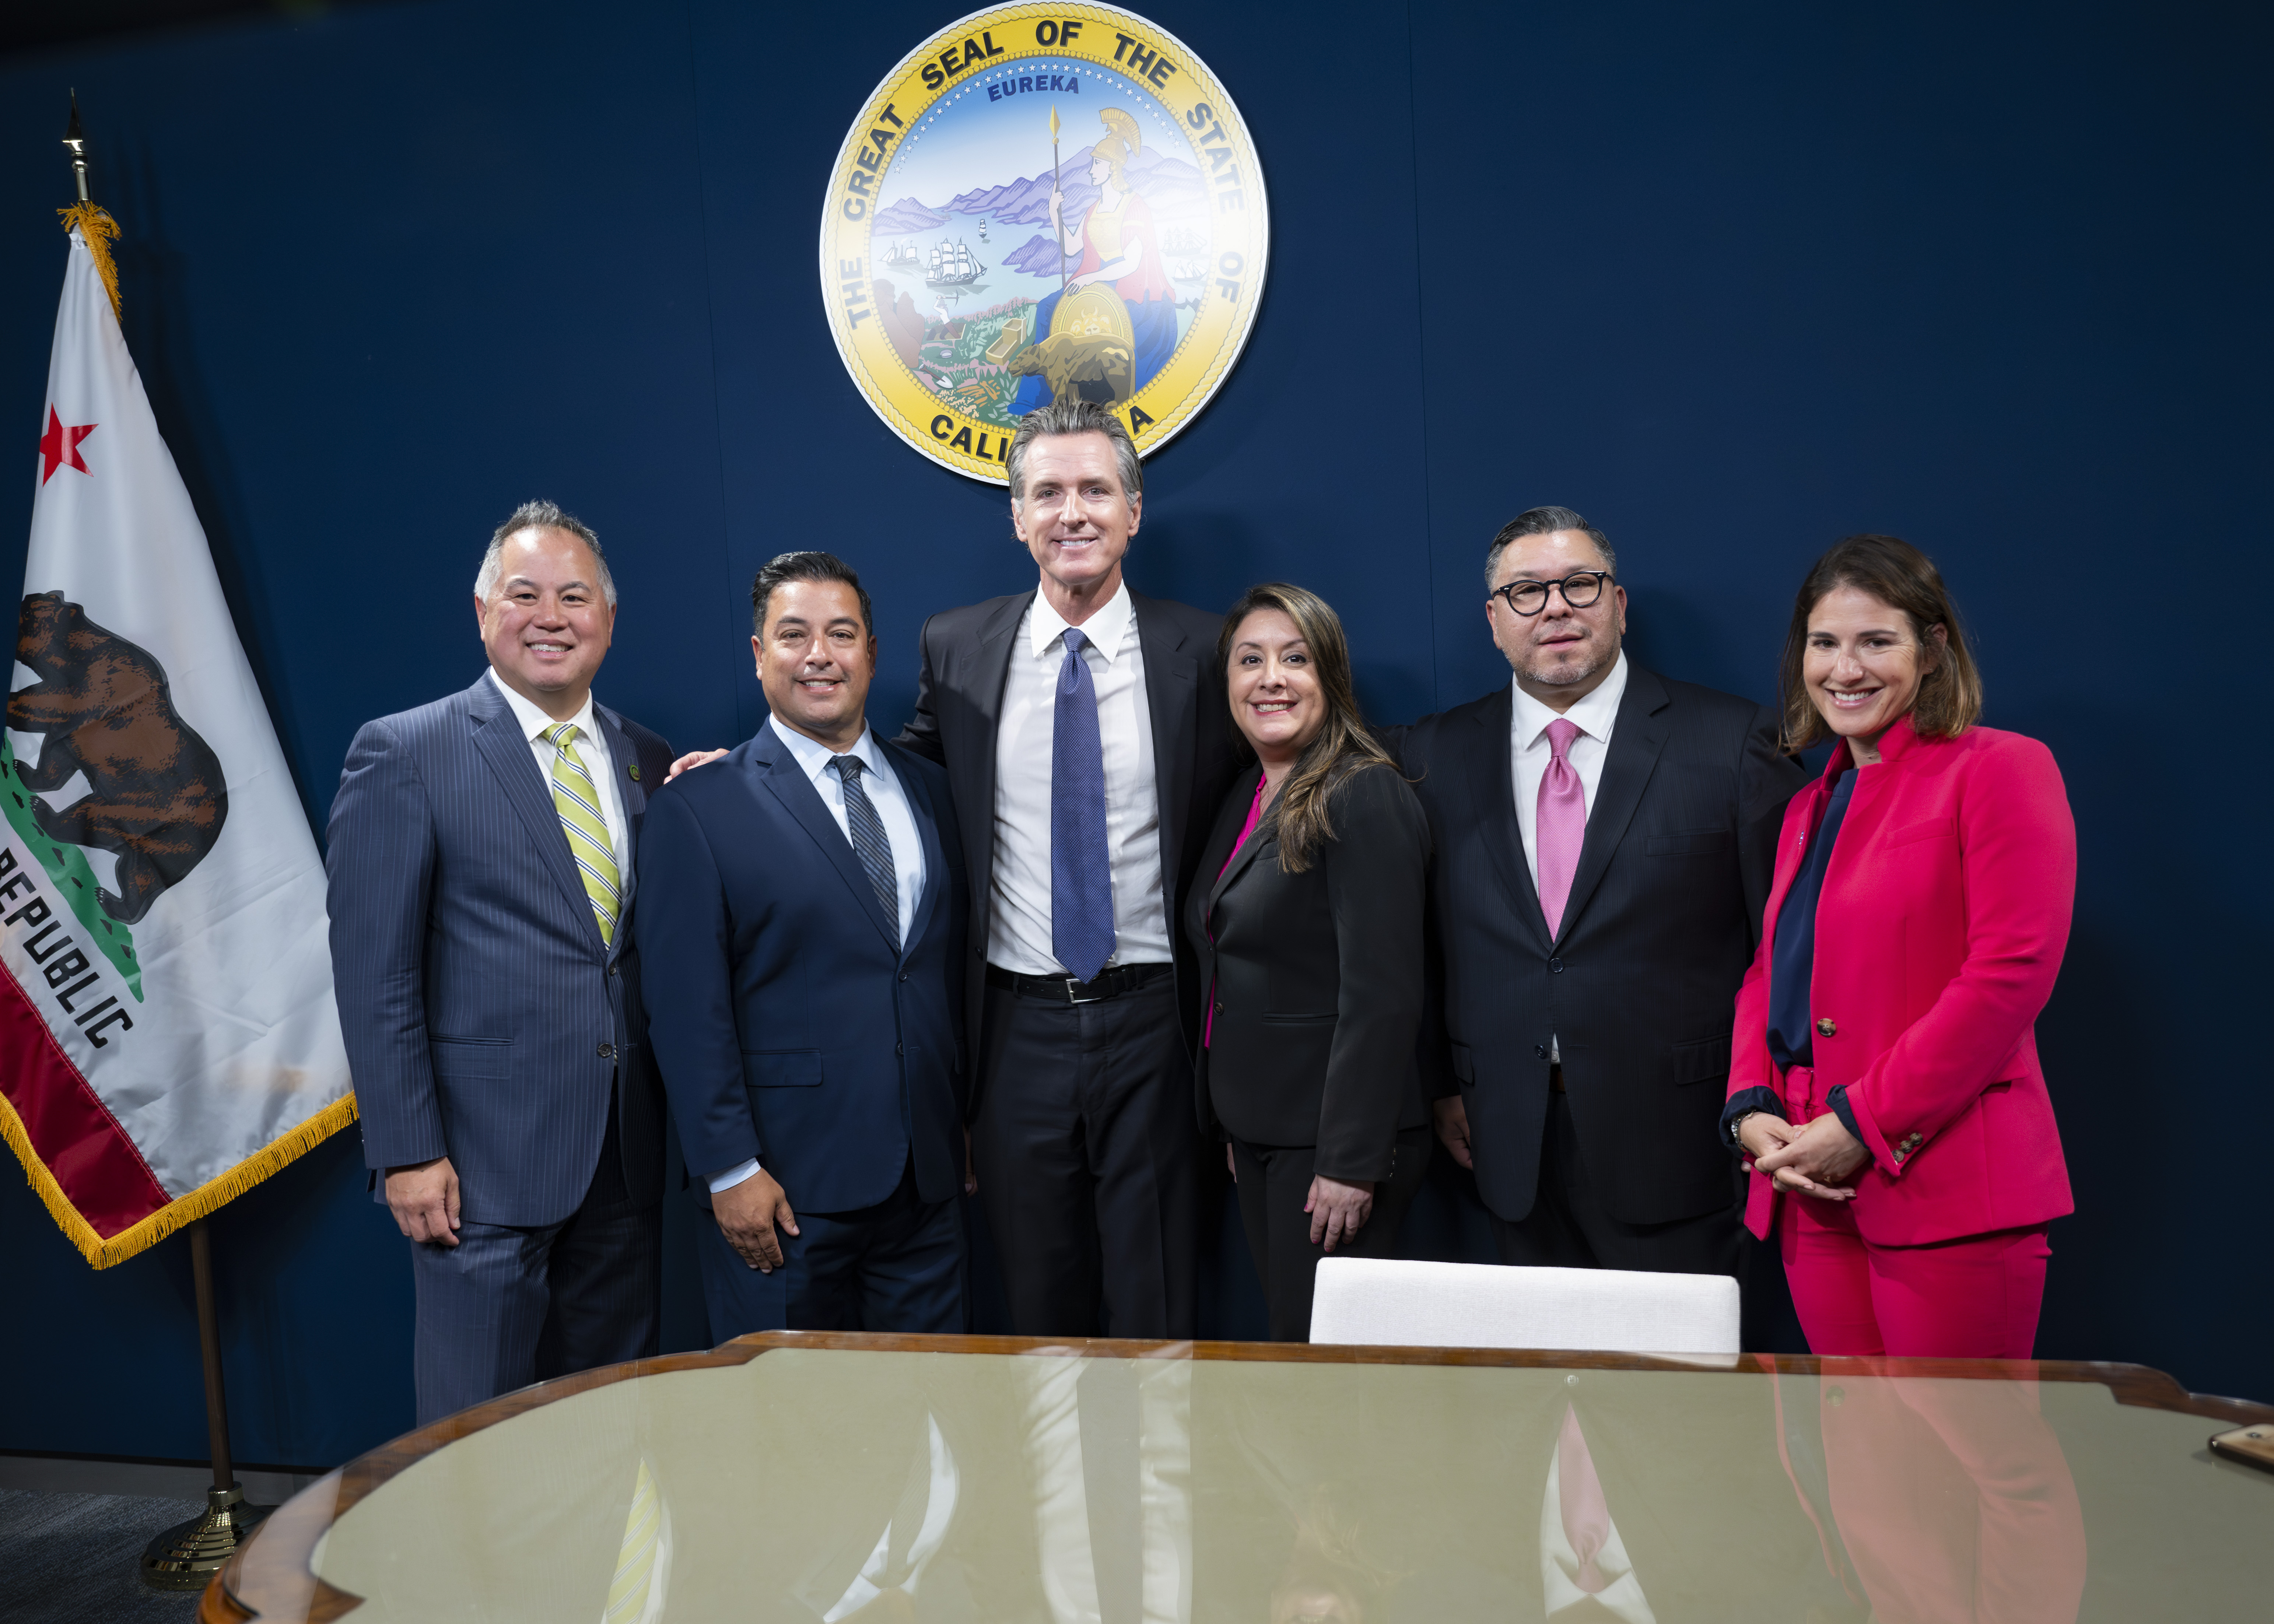 Group photo with Assemblymembers Ting, Villapudua, Luz Rivas, Garcia, and Bauer-Kahan, and Governor Newsom